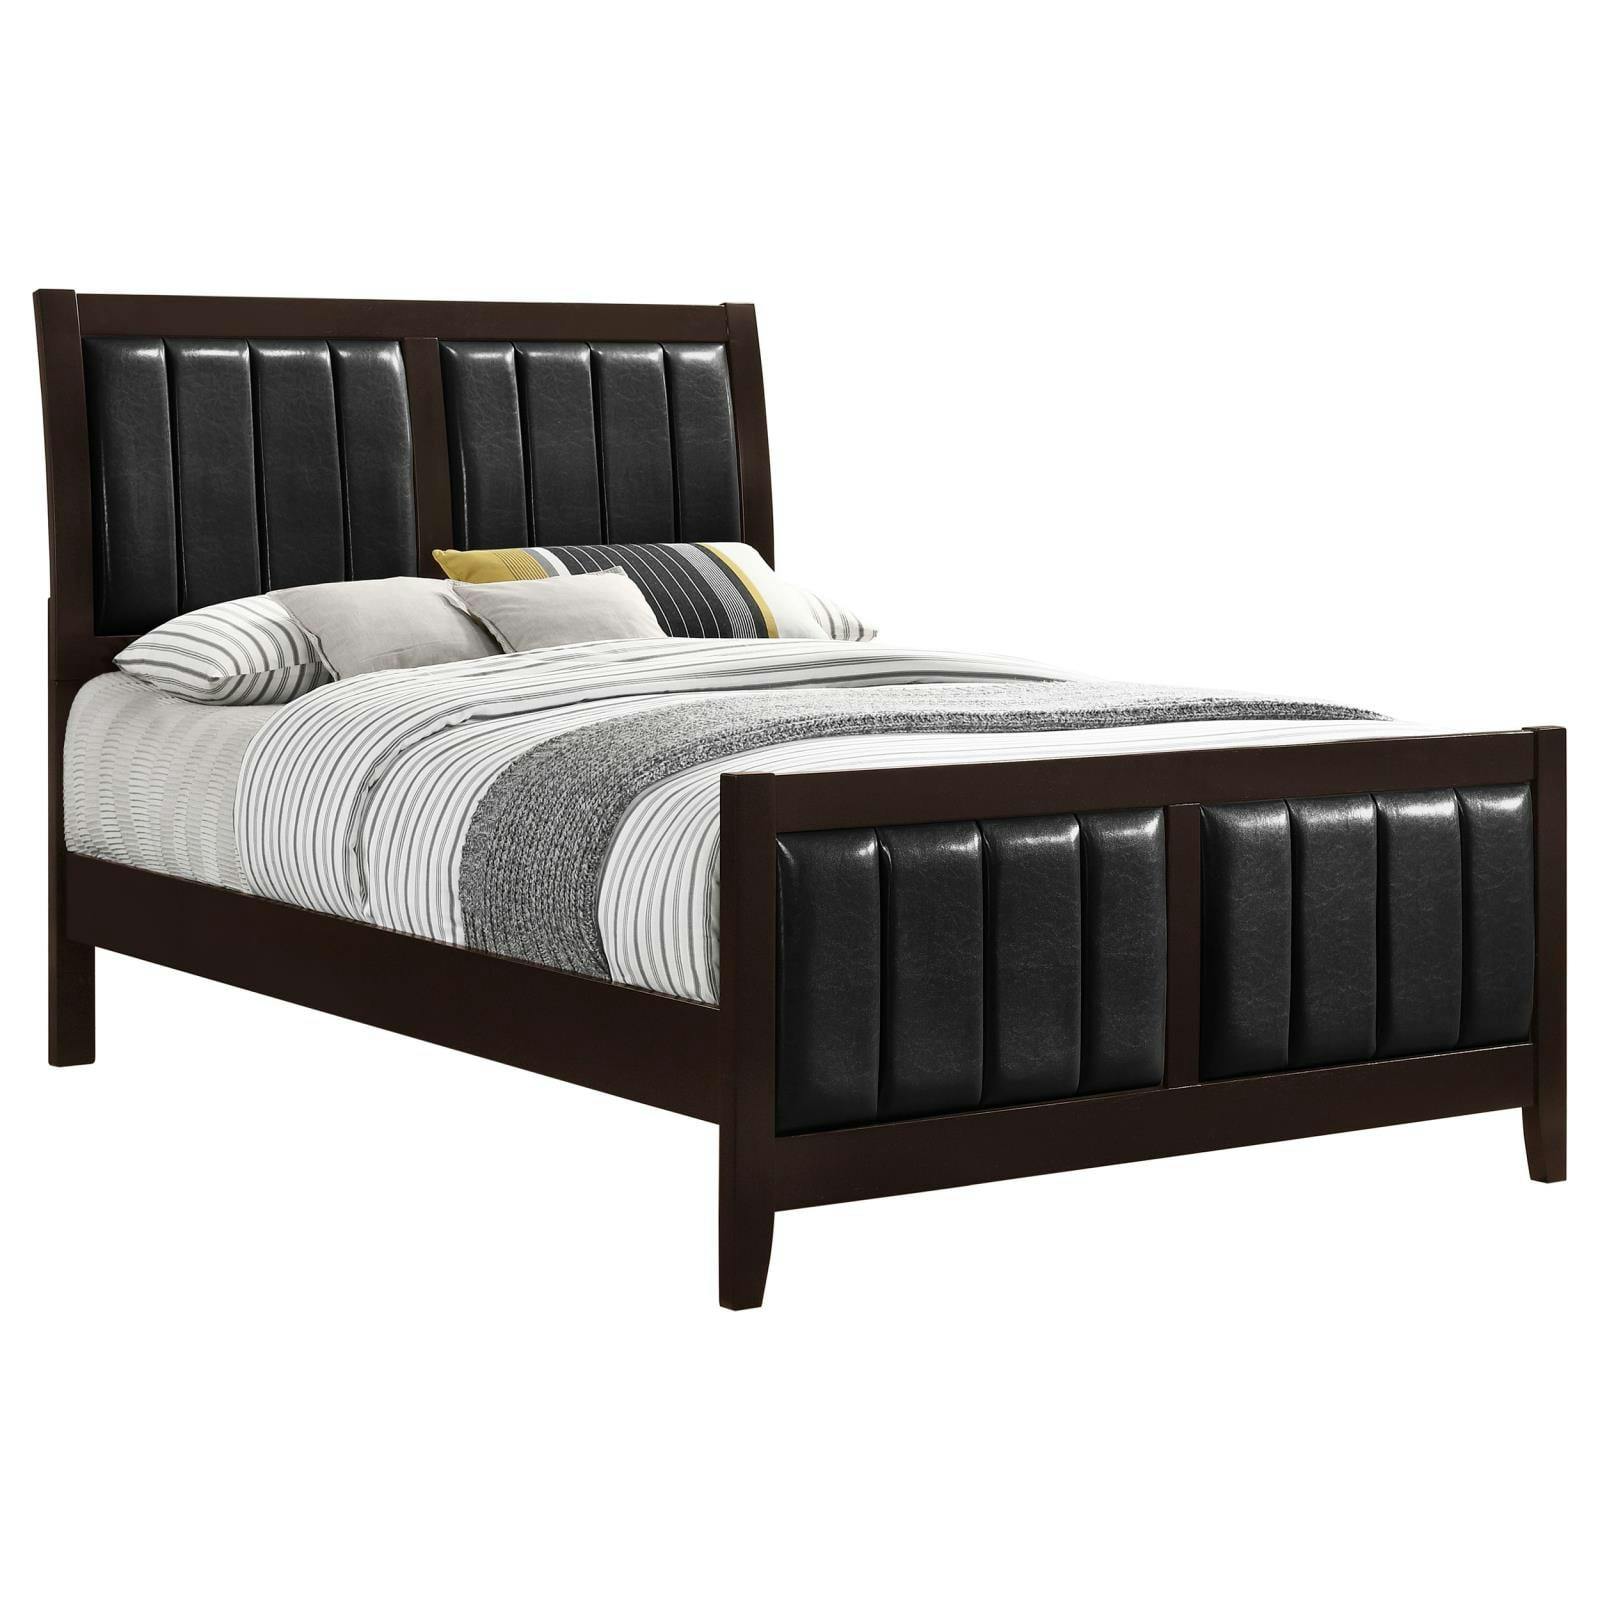 Carlton Queen Upholstered Bed with Drawer in Black Faux Leather and Cappuccino